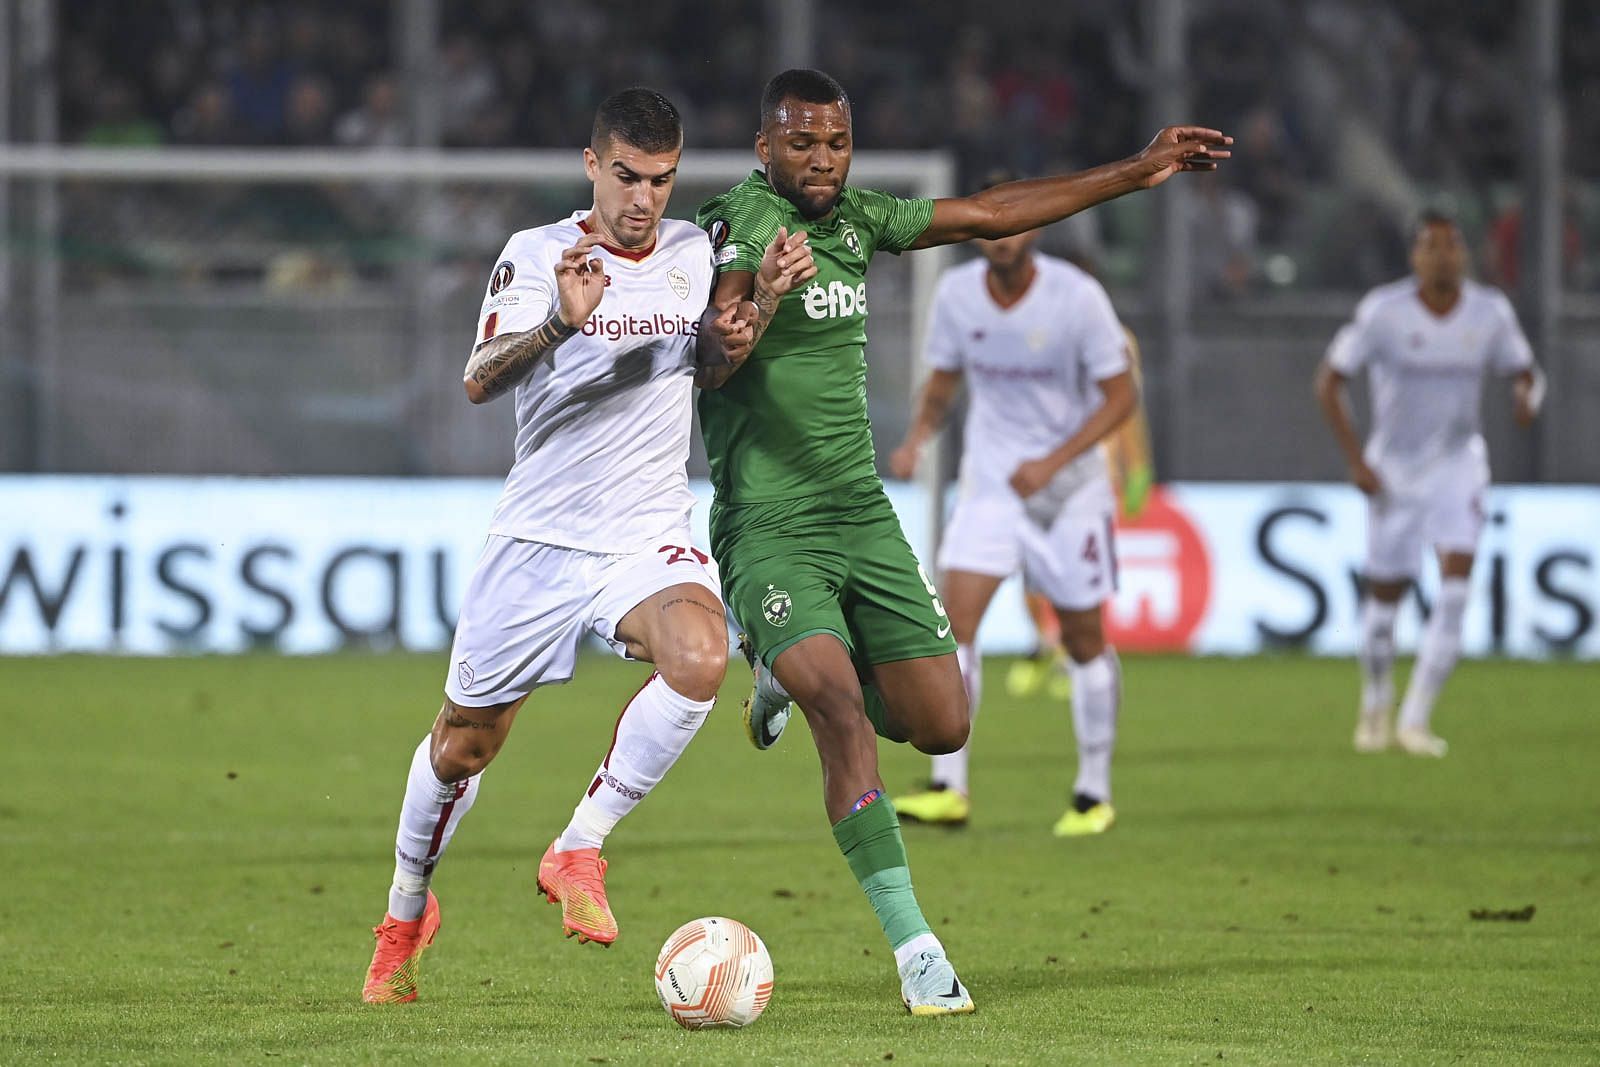 Ludogorets stunned Roma 2-1 on the opening day